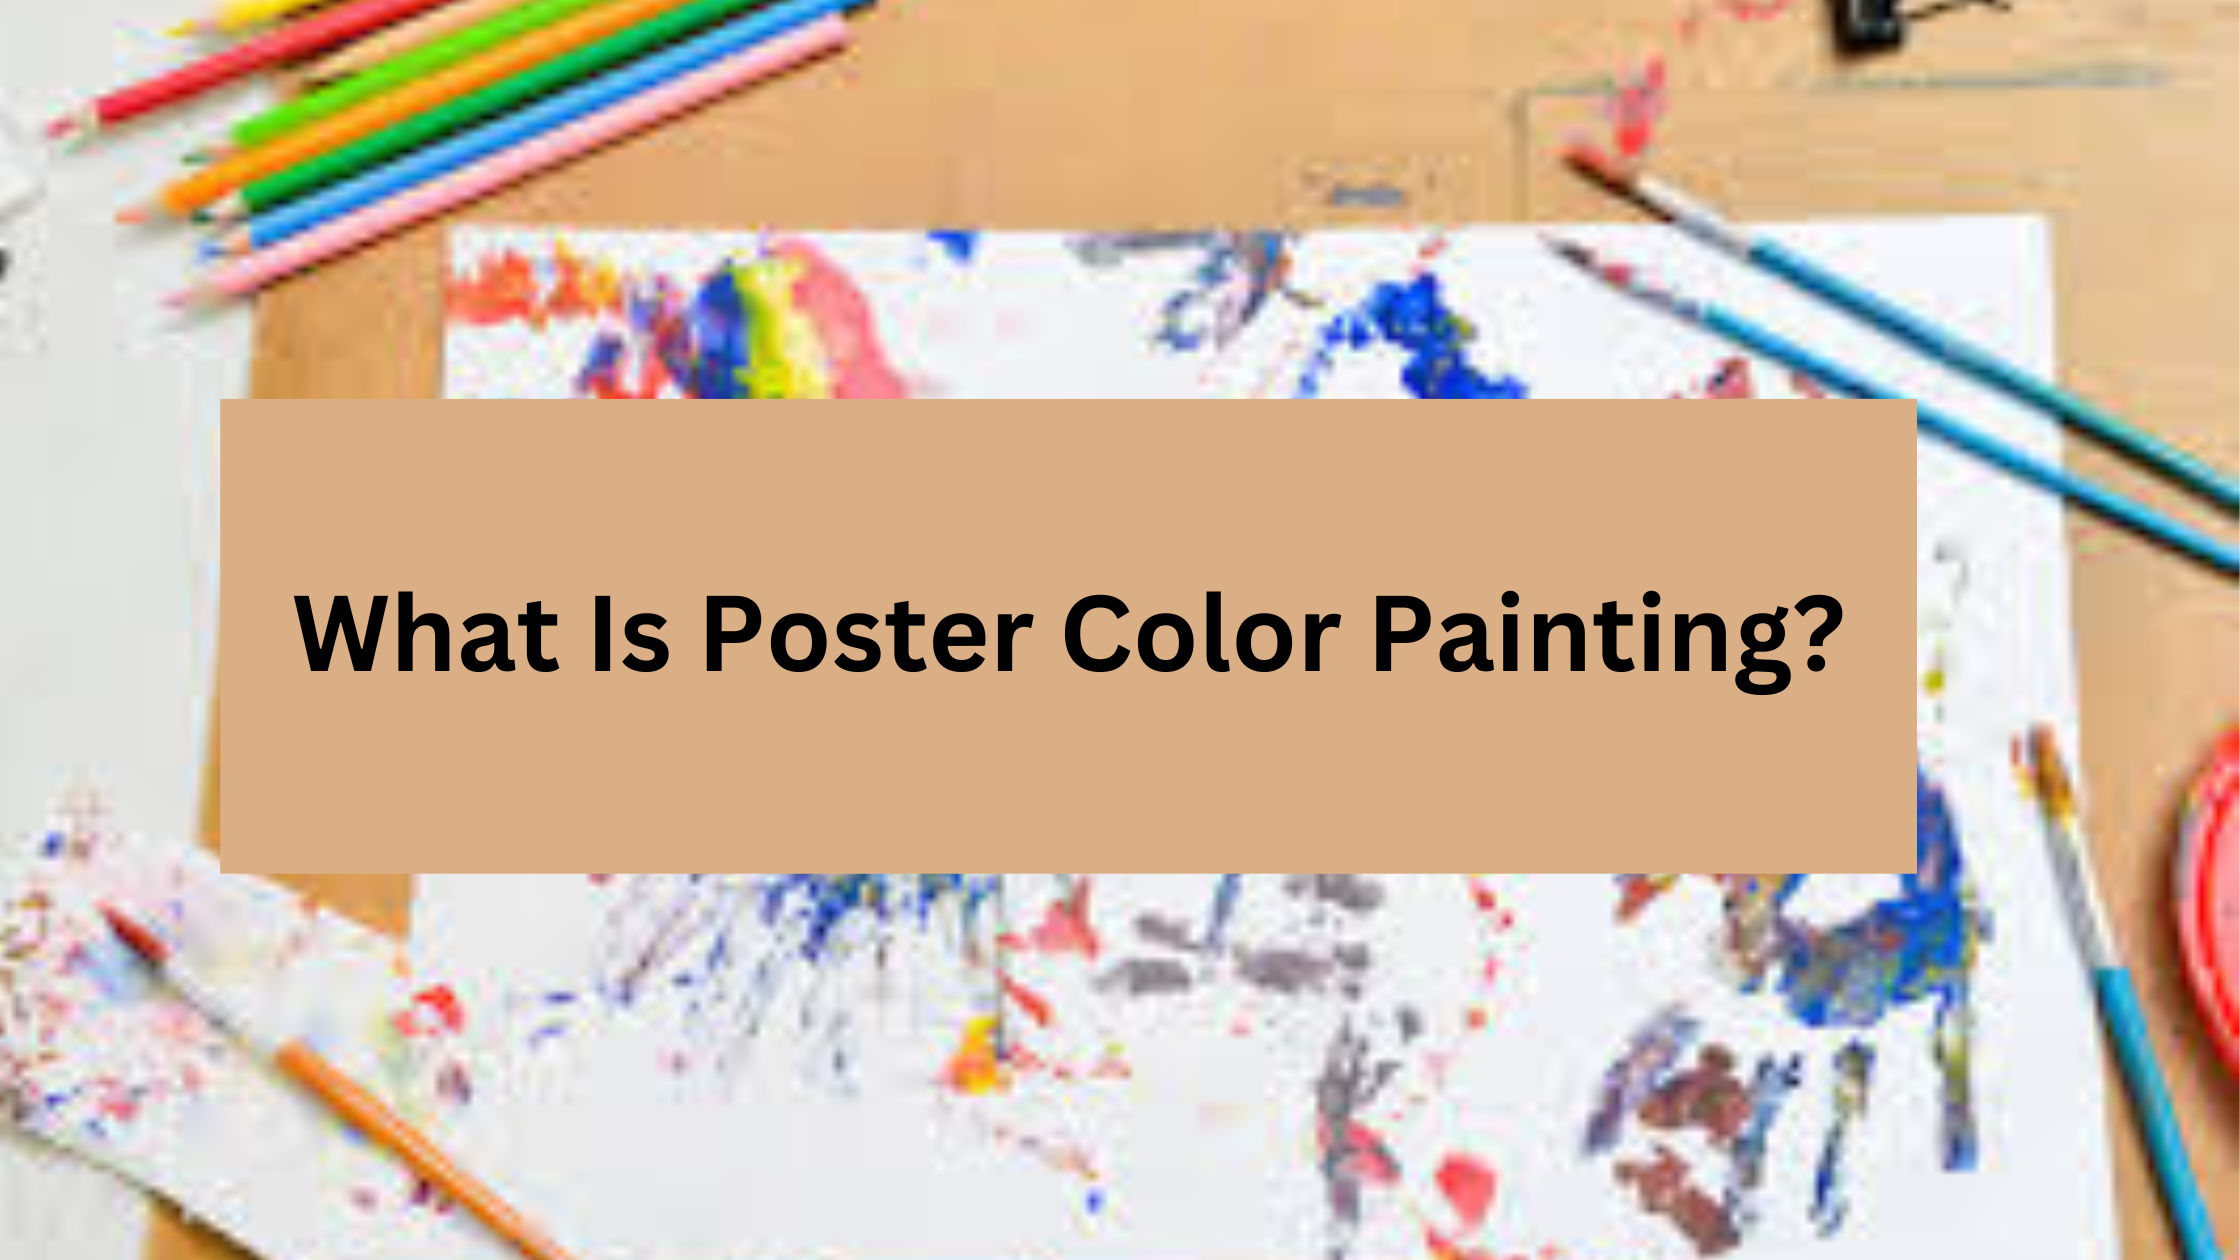 What Is Poster Color Painting?